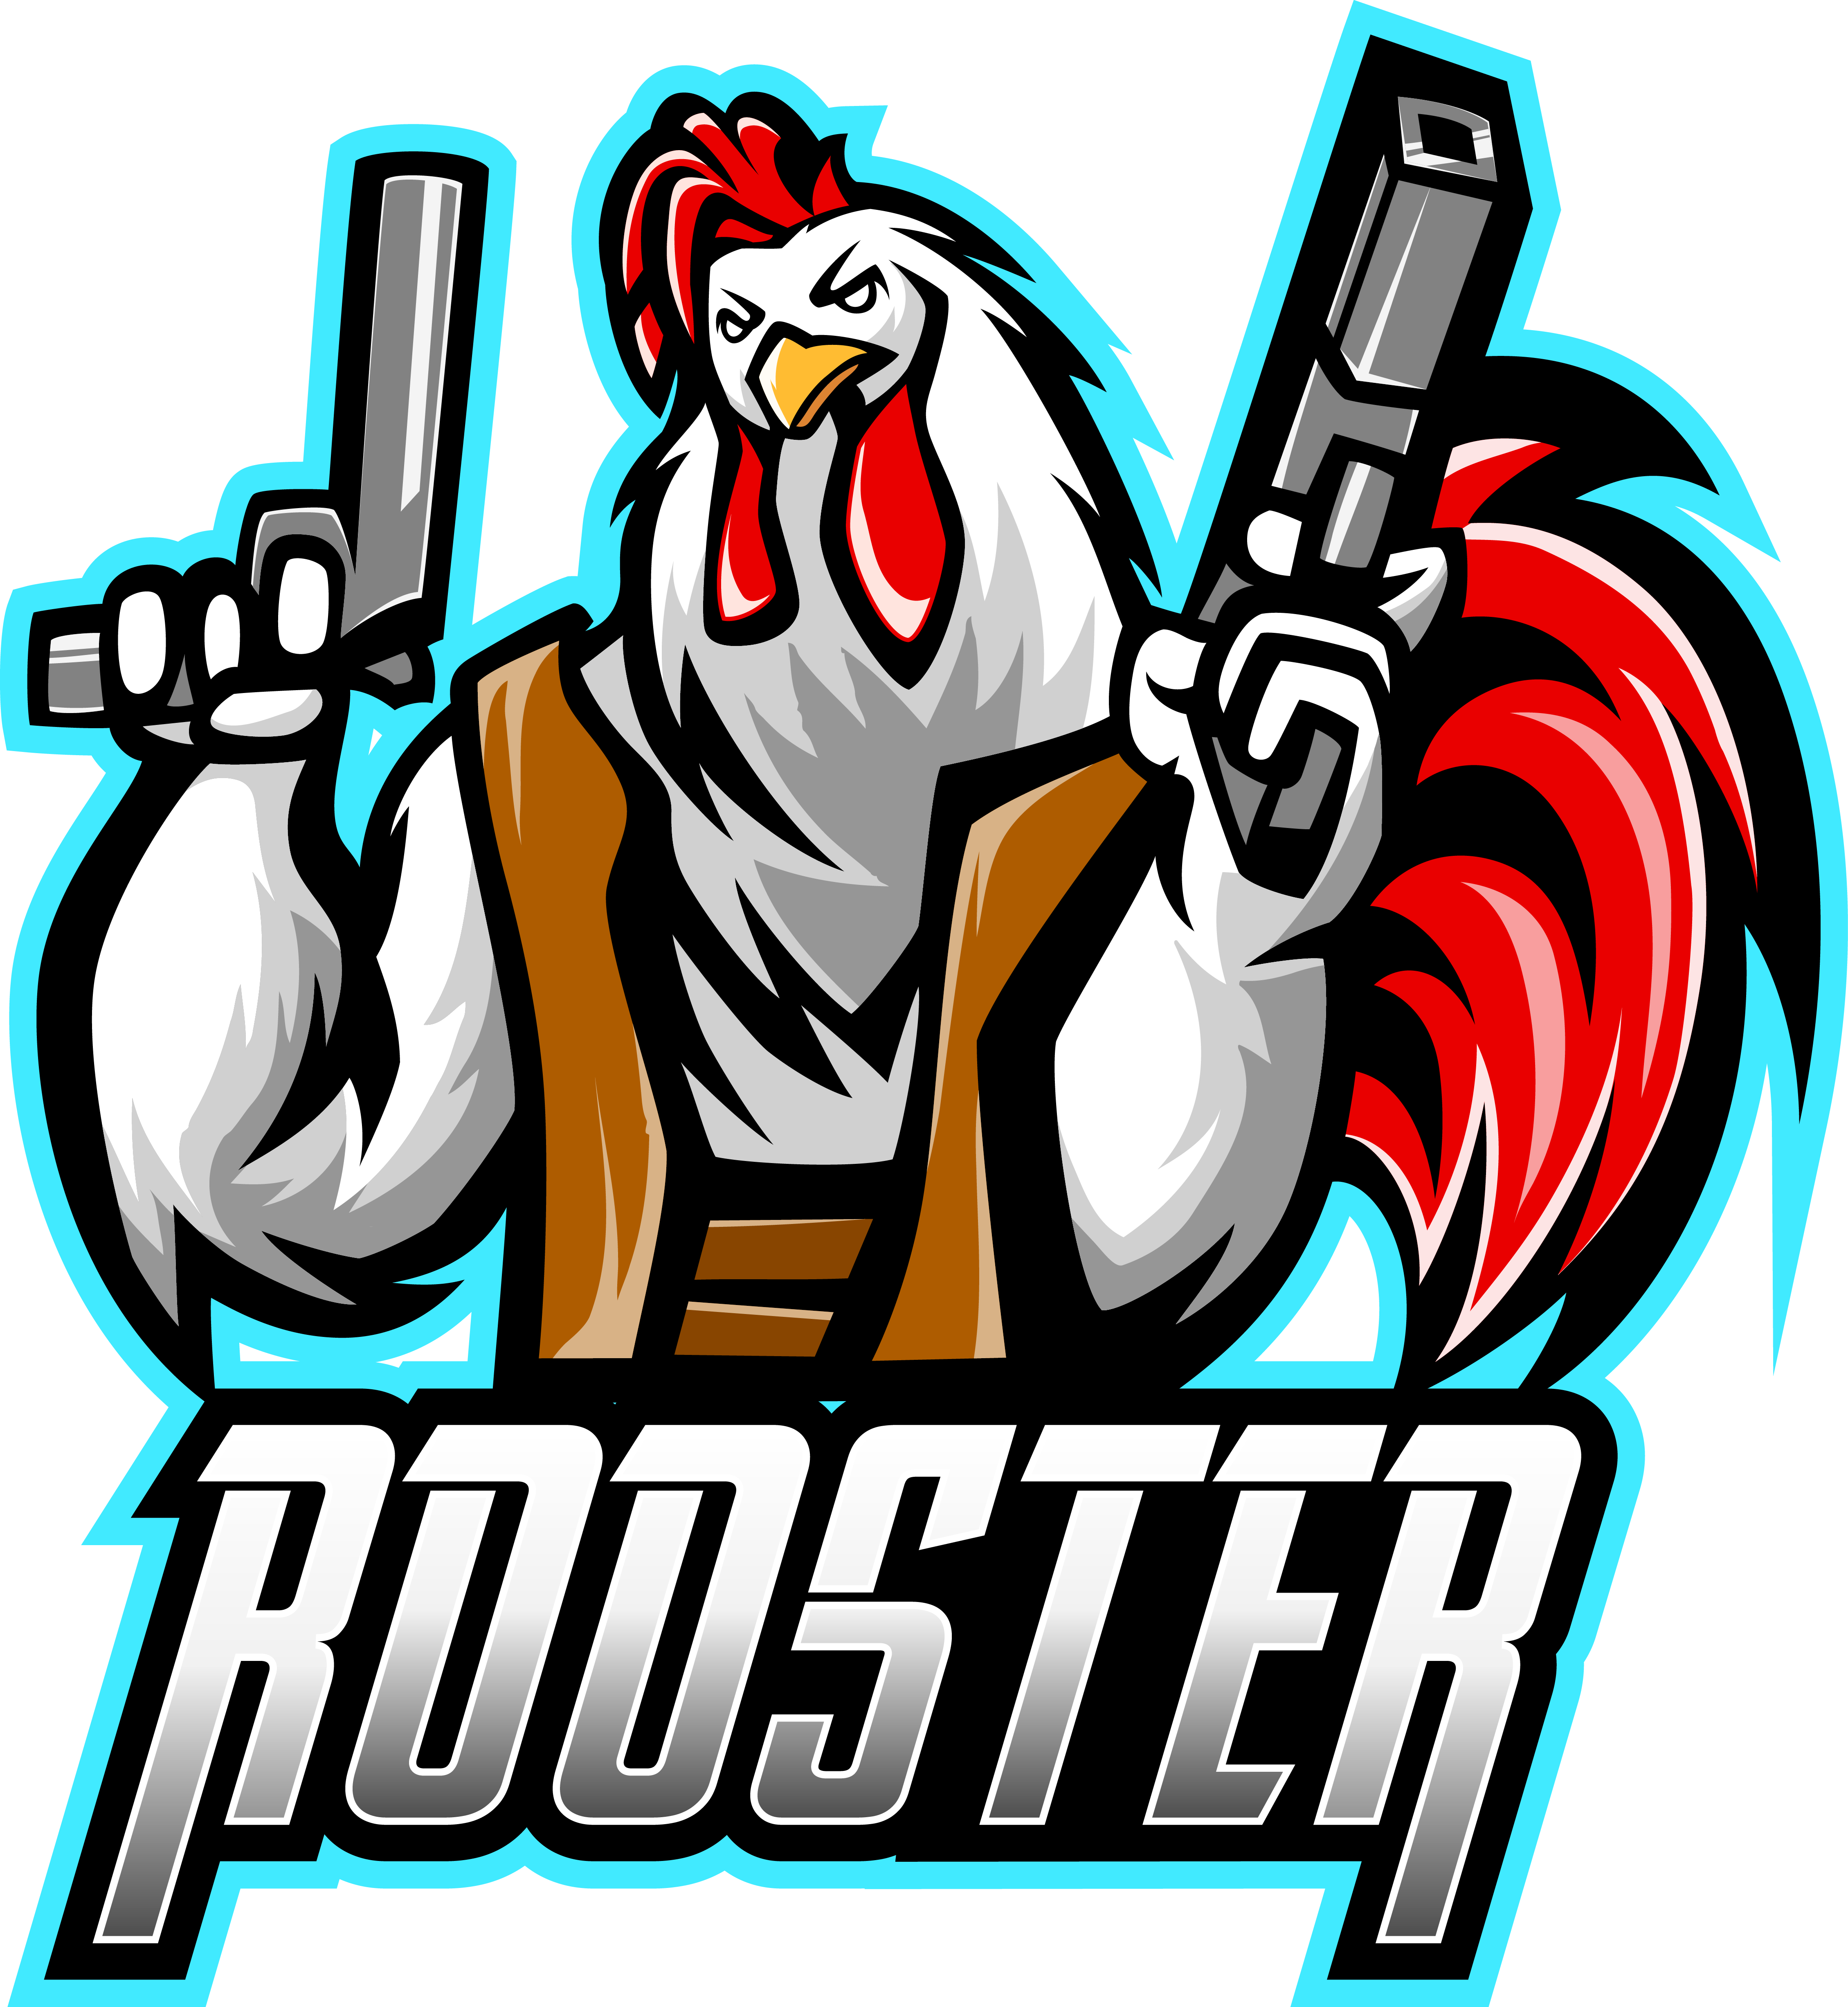 Rooster with gun mascot logo design By Visink | TheHungryJPEG.com